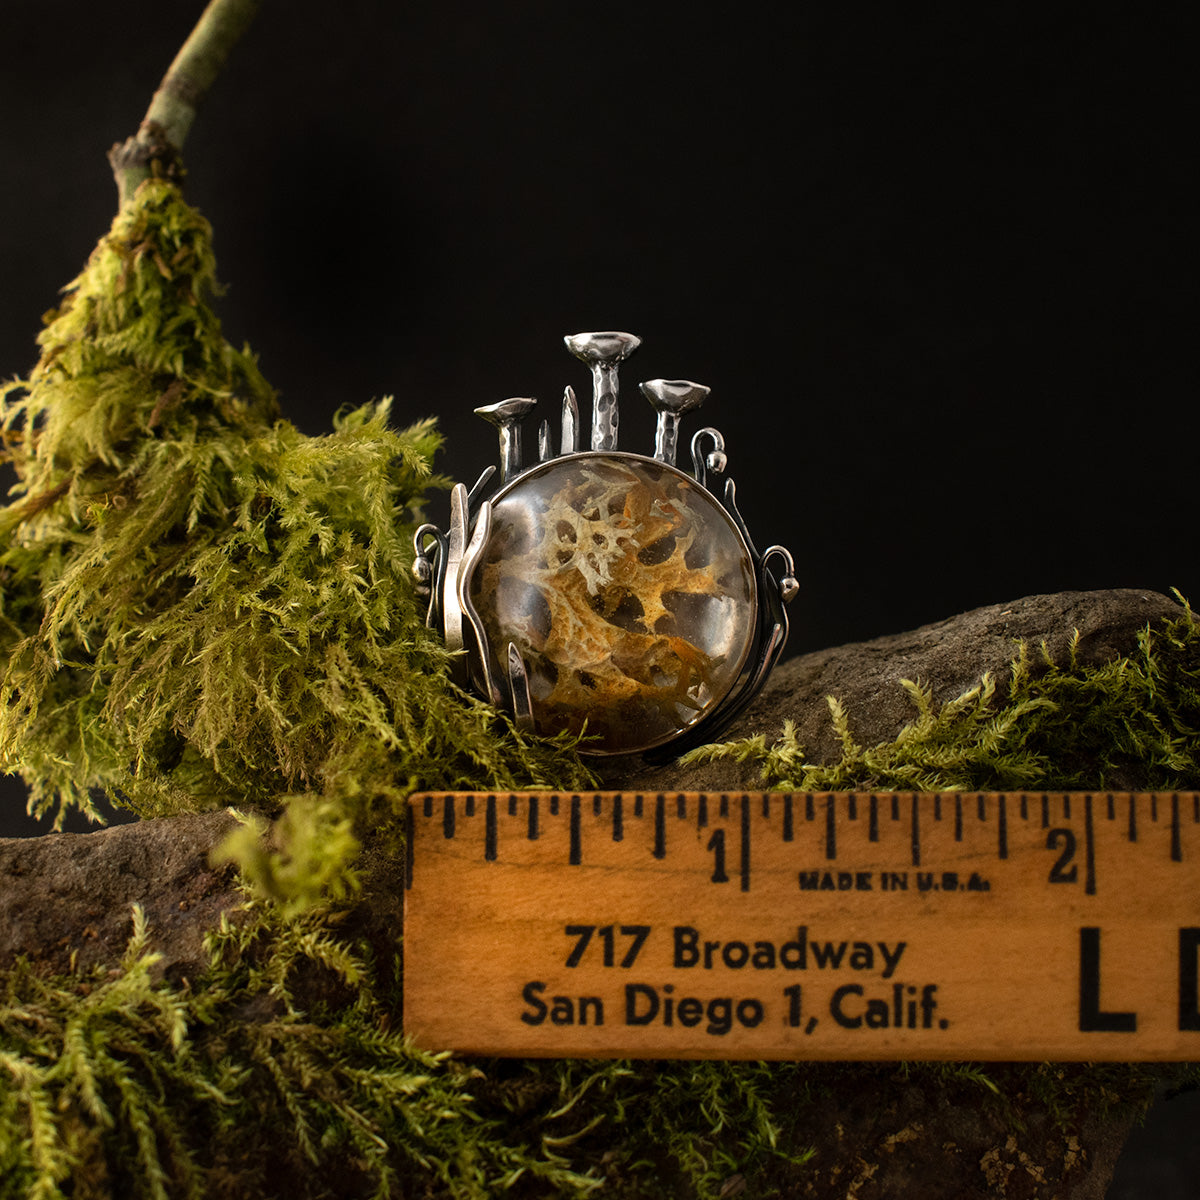 The Lichen Love Brooch with a ruler for scale, measuring around 1 and 1/4 inches wide overall.